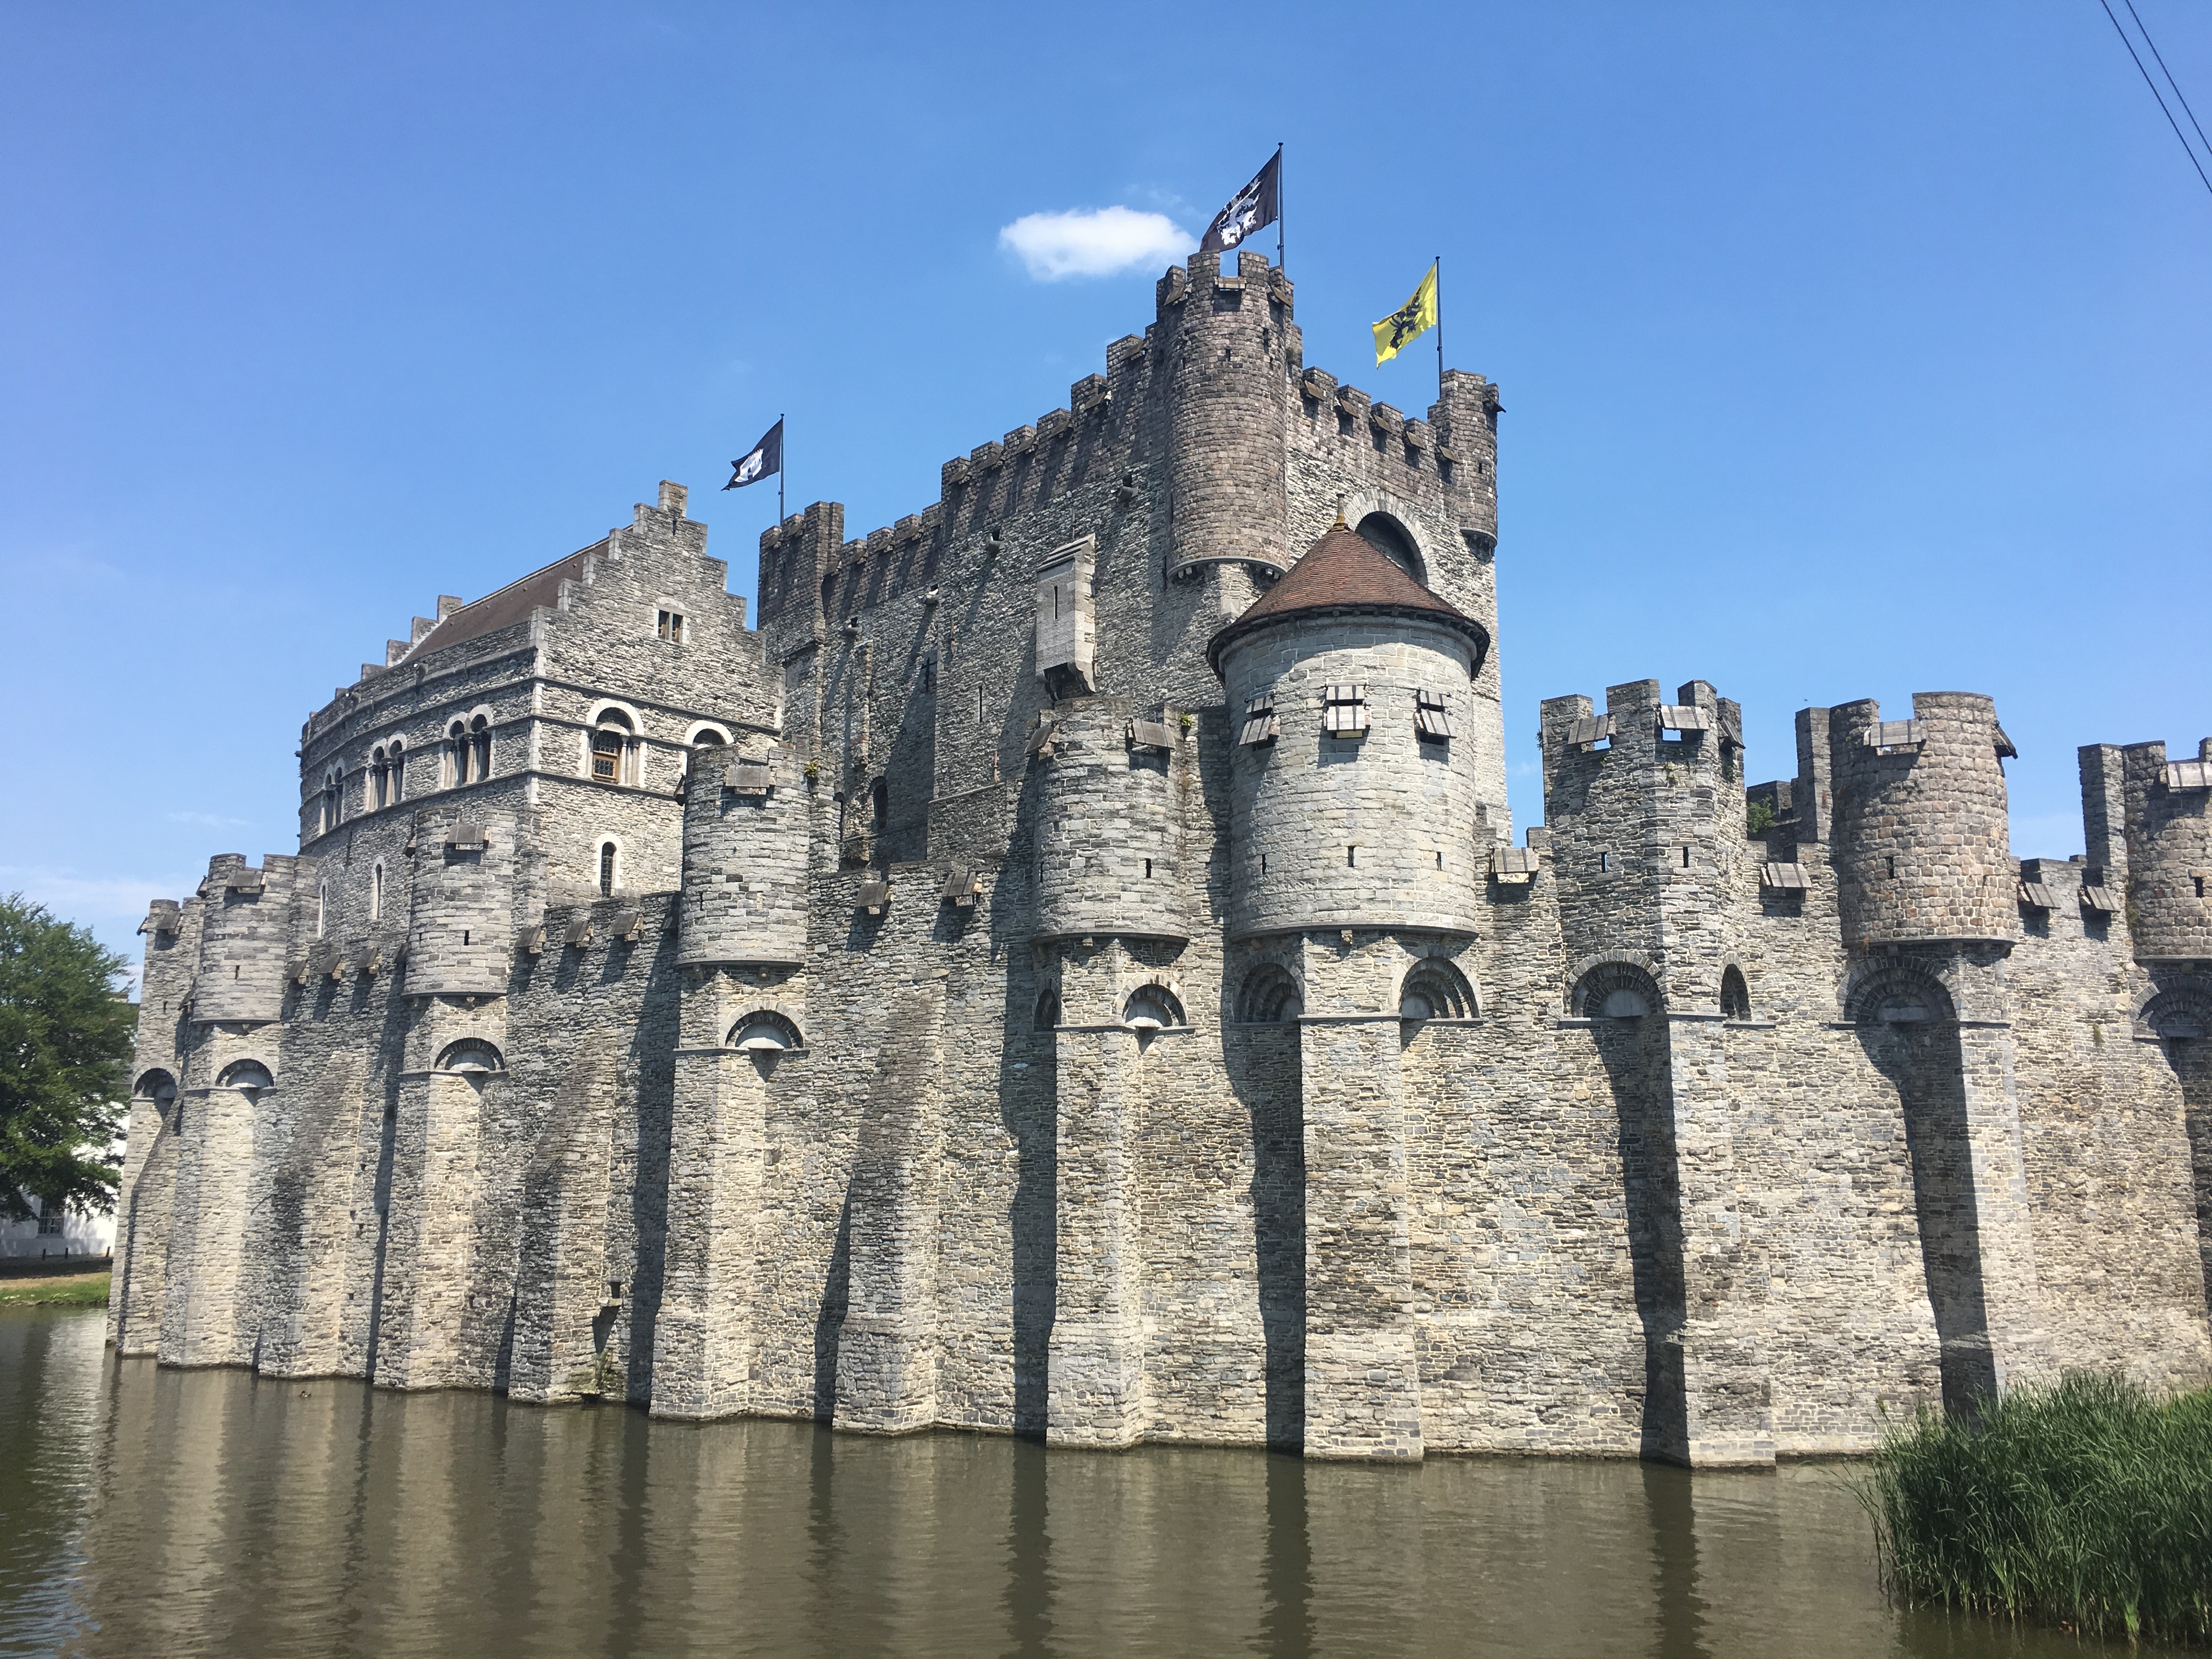 The Castle of the Counts in Ghent, Belgium.